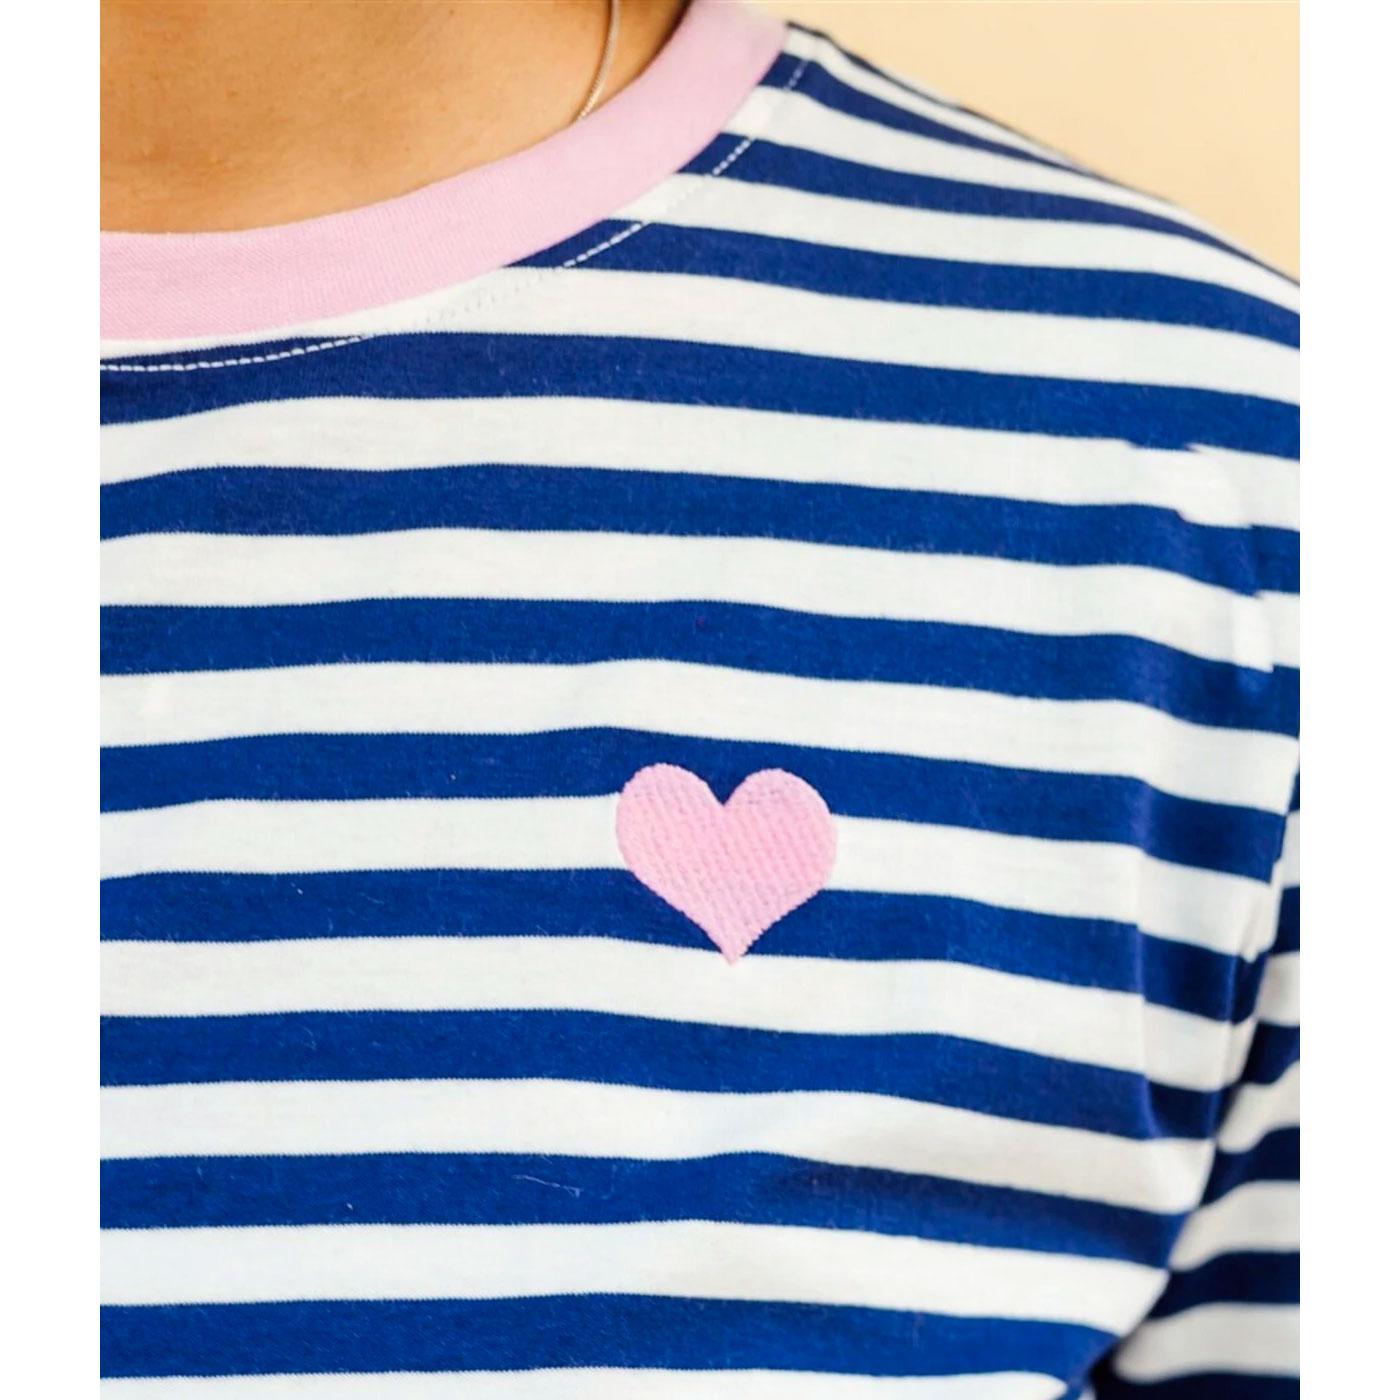 Heart Sweatshirt - Pink and Navy StripesPink and Navy Stripes